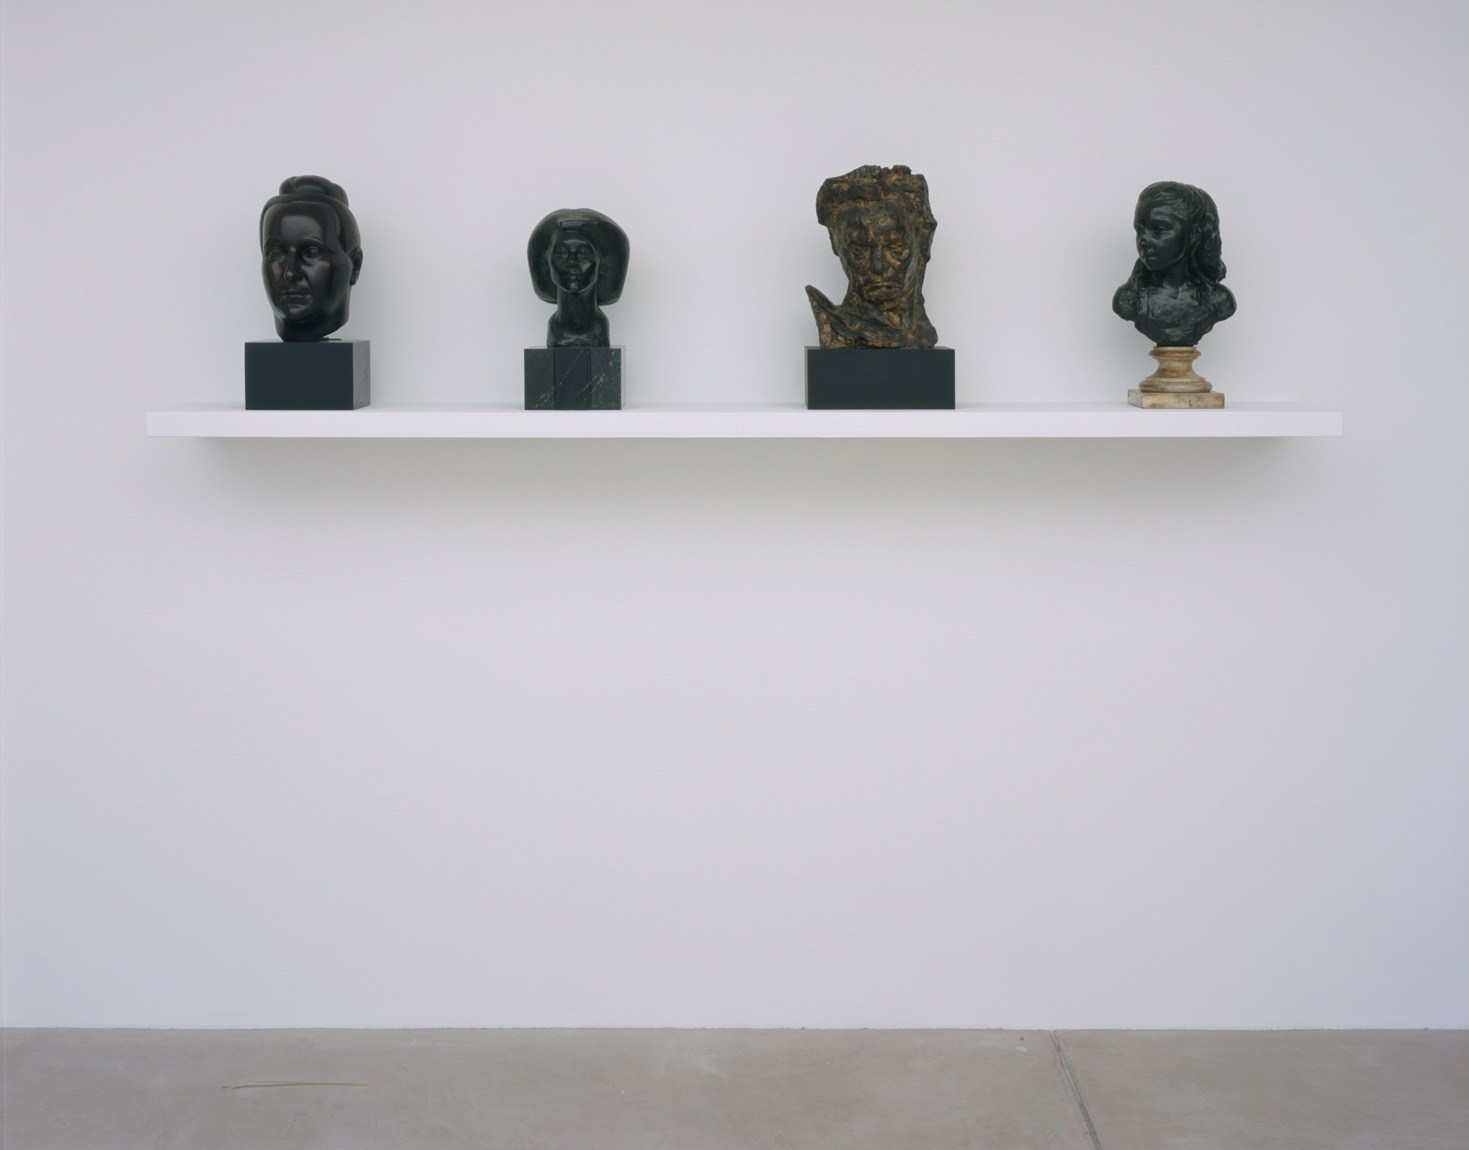 Four busts of varying styles sit on a white wall shelf in the Lower-Main Gallery.